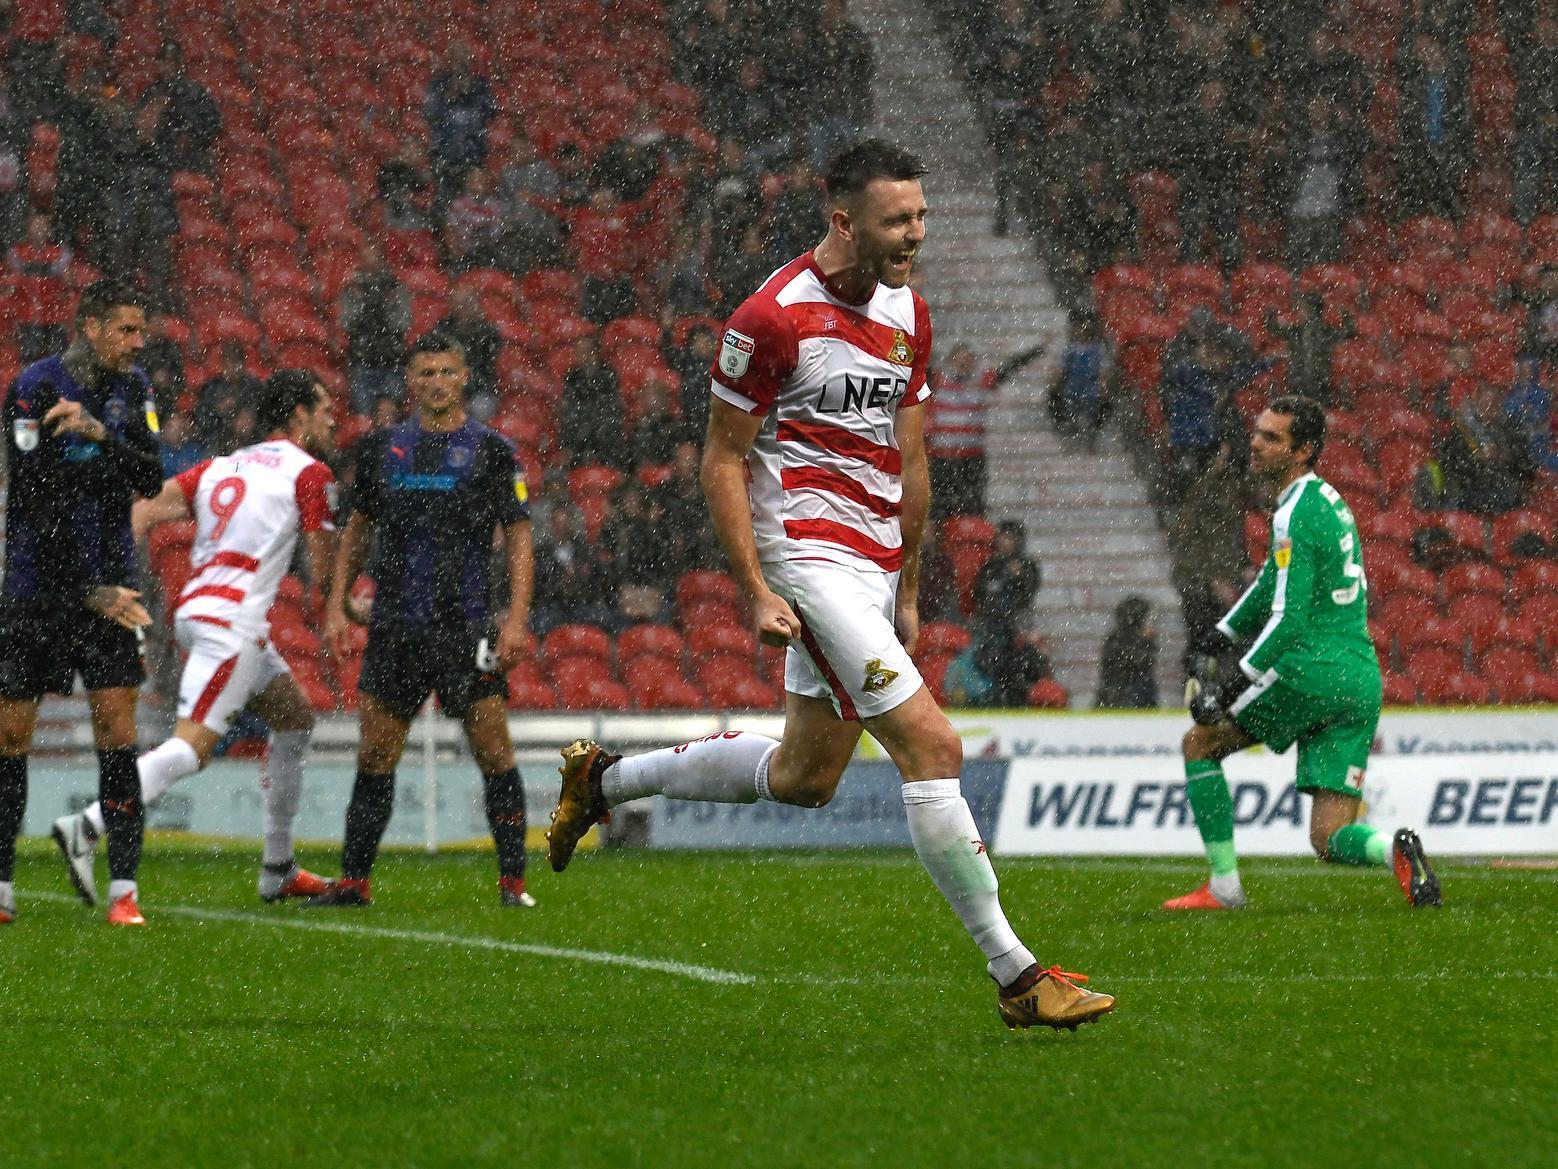 Doncaster Rovers defender Ben Whiteman has insisted that he's fully focused on his club and won't make any decisions on his future until the summer, amid speculation linking him with a move to Derby County. (The 72)